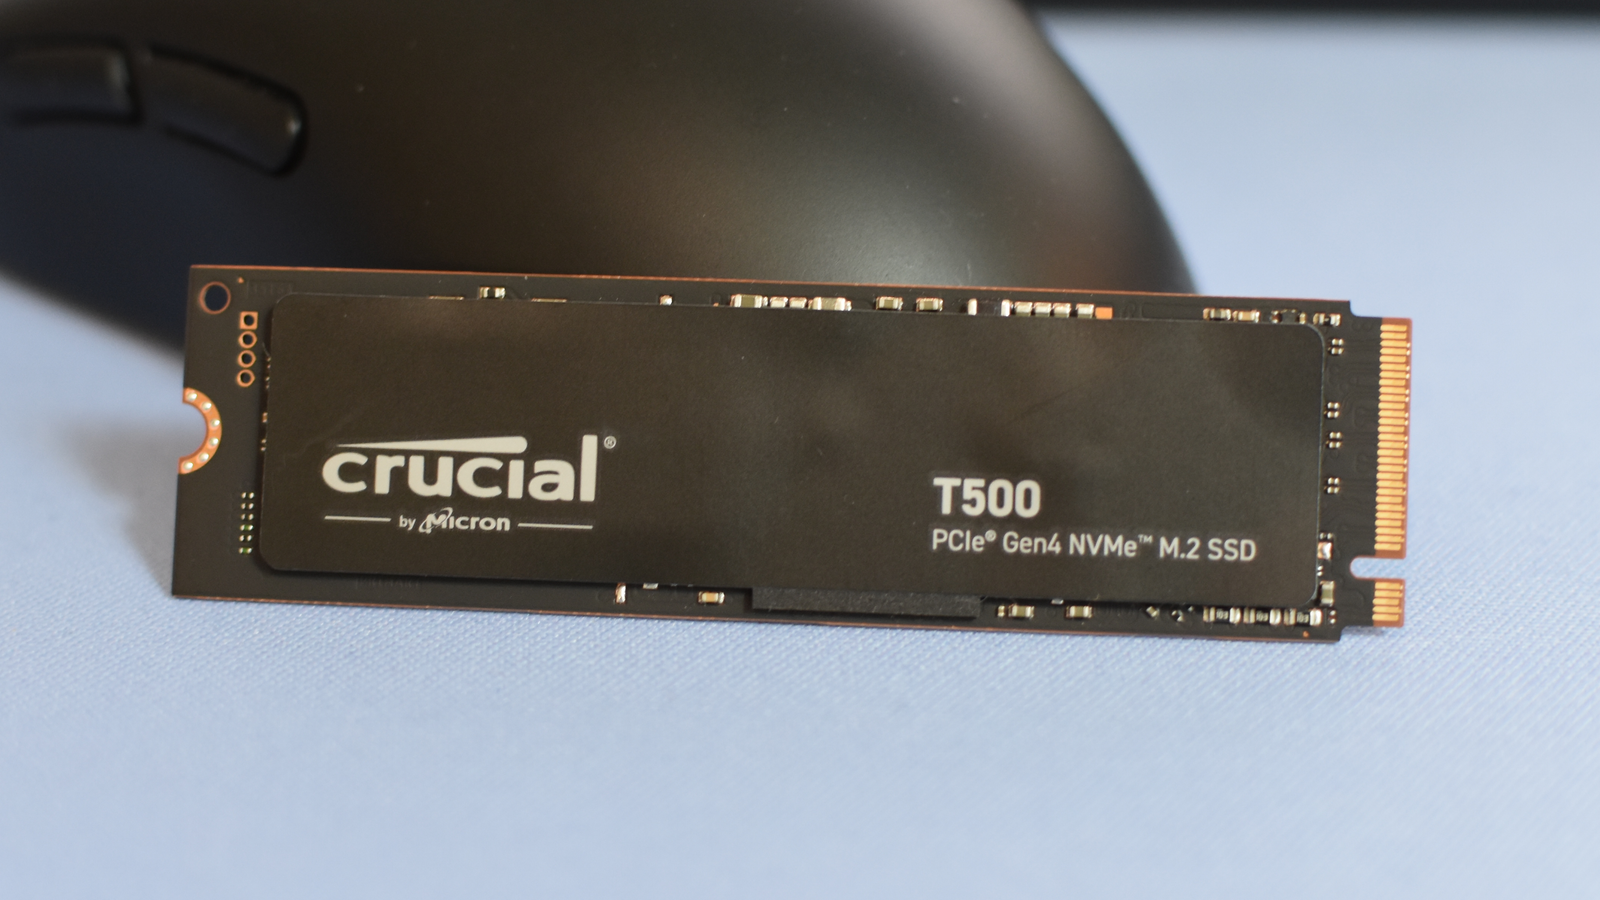 It's practically brand new, but the Crucial T500 SSD is already getting big  Black Friday savings